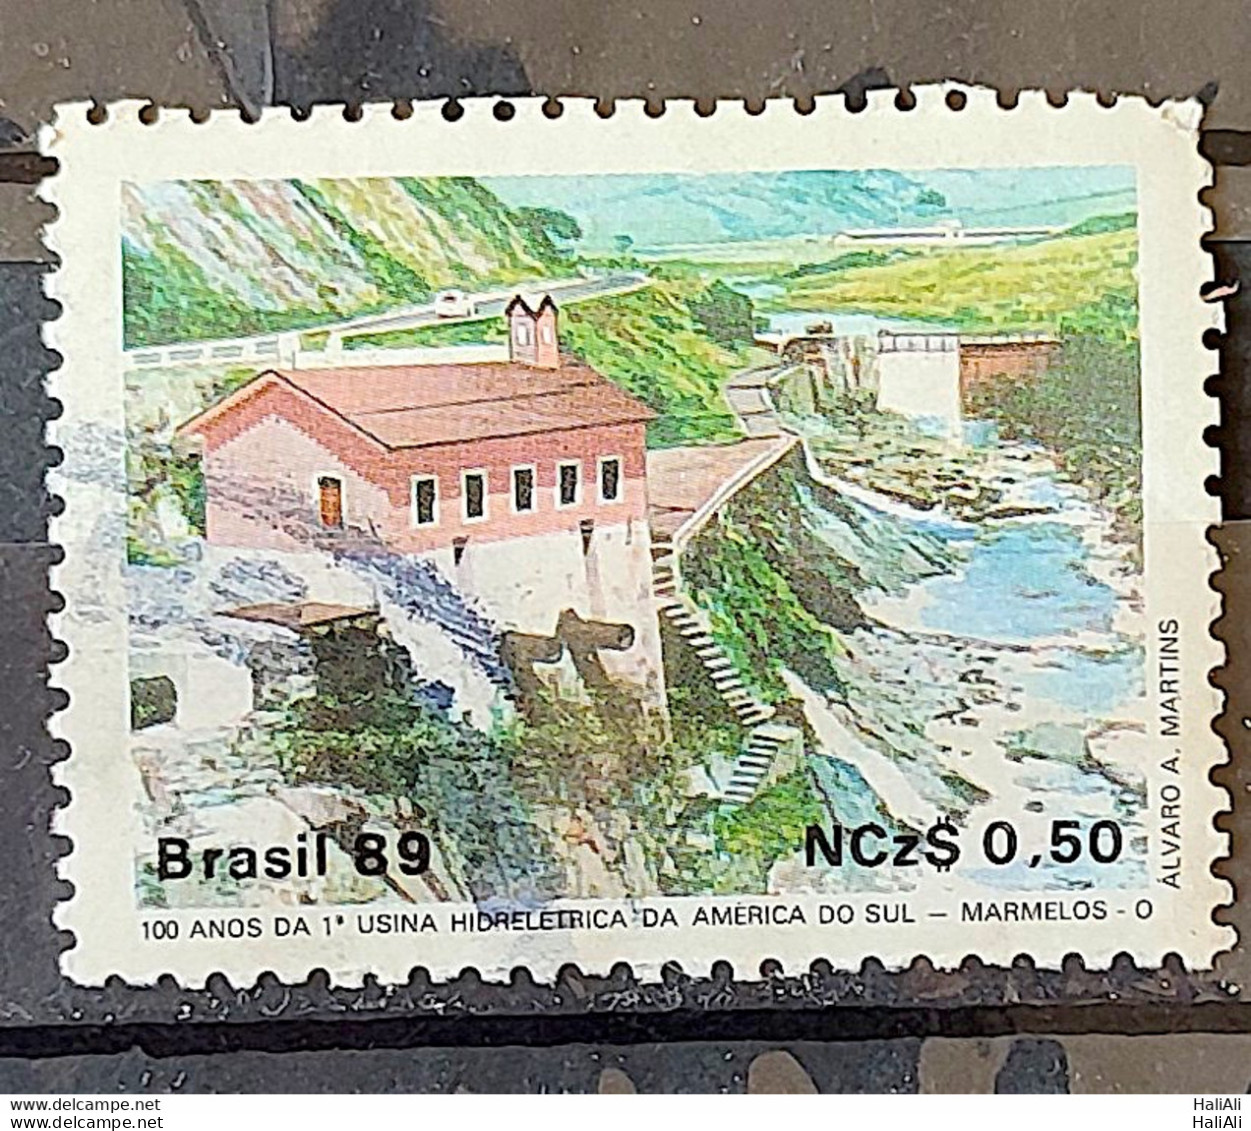 C 1644 Brazil Stamp 100 Years Hydroelectric Marmelos Energy Electricity Juiz De Fora 1989 Circulated 22 - Used Stamps